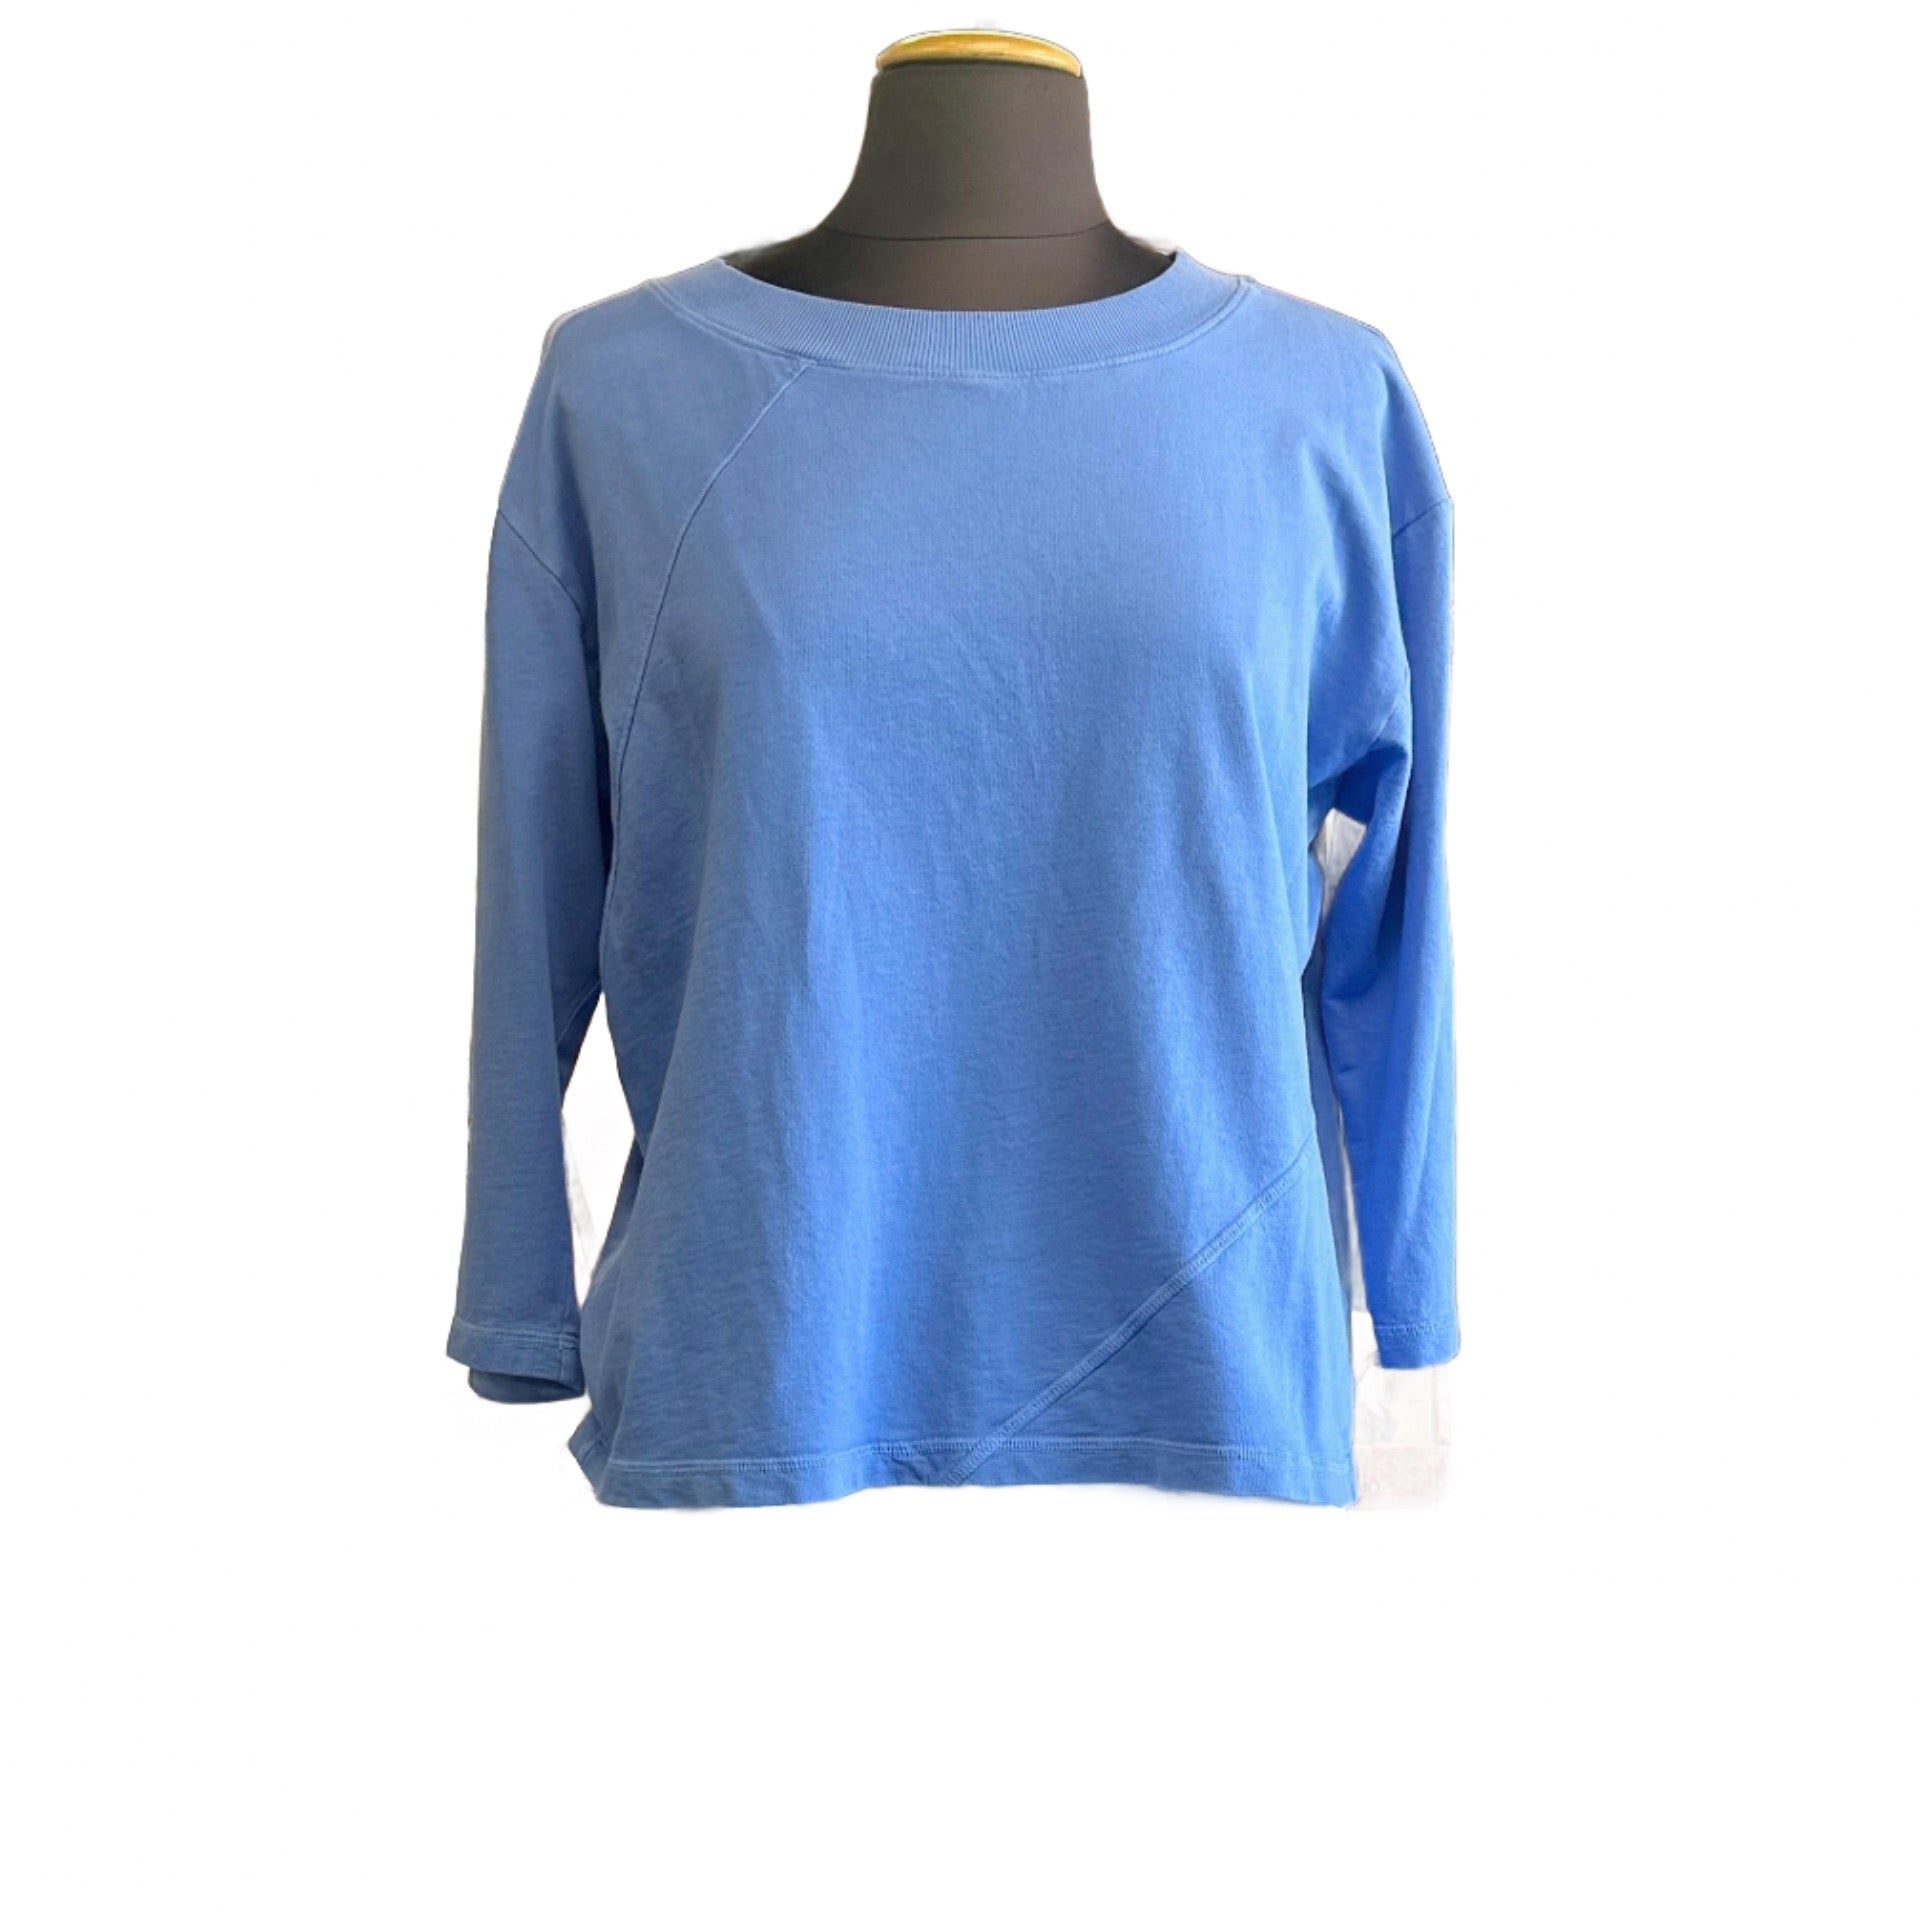 Color Me Cotton 3/4 Sleeve Top at Victoria Susan Wearable Art.  Clothing for Women.  Made in the USA clothing. 